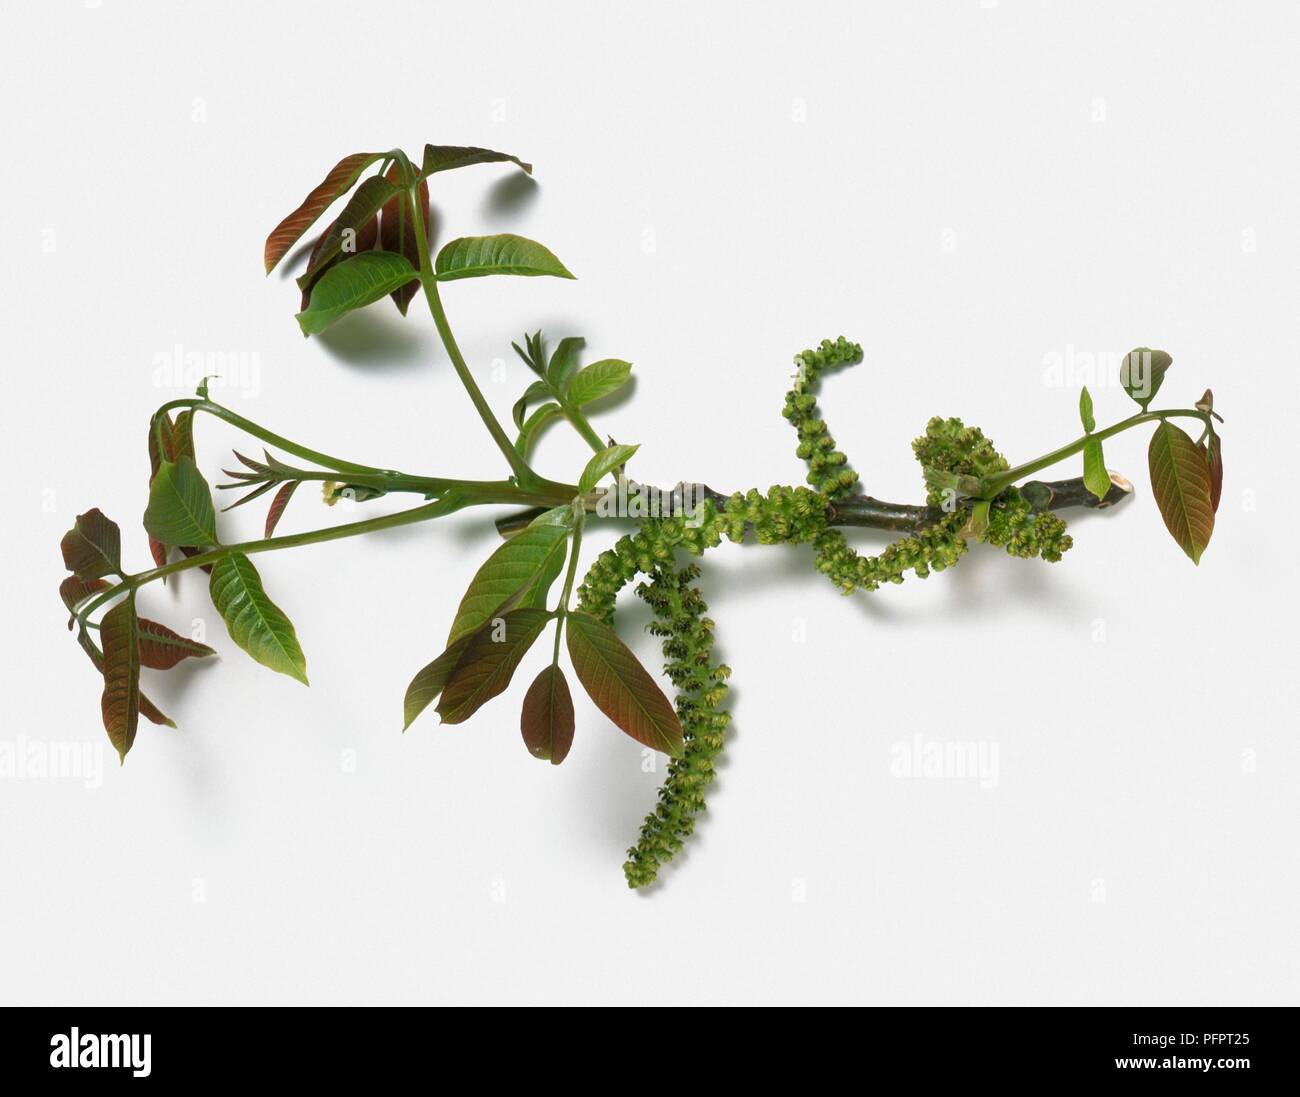 Juglans regia (English Walnut), red-green leaves and catkins on thin branchlet Stock Photo